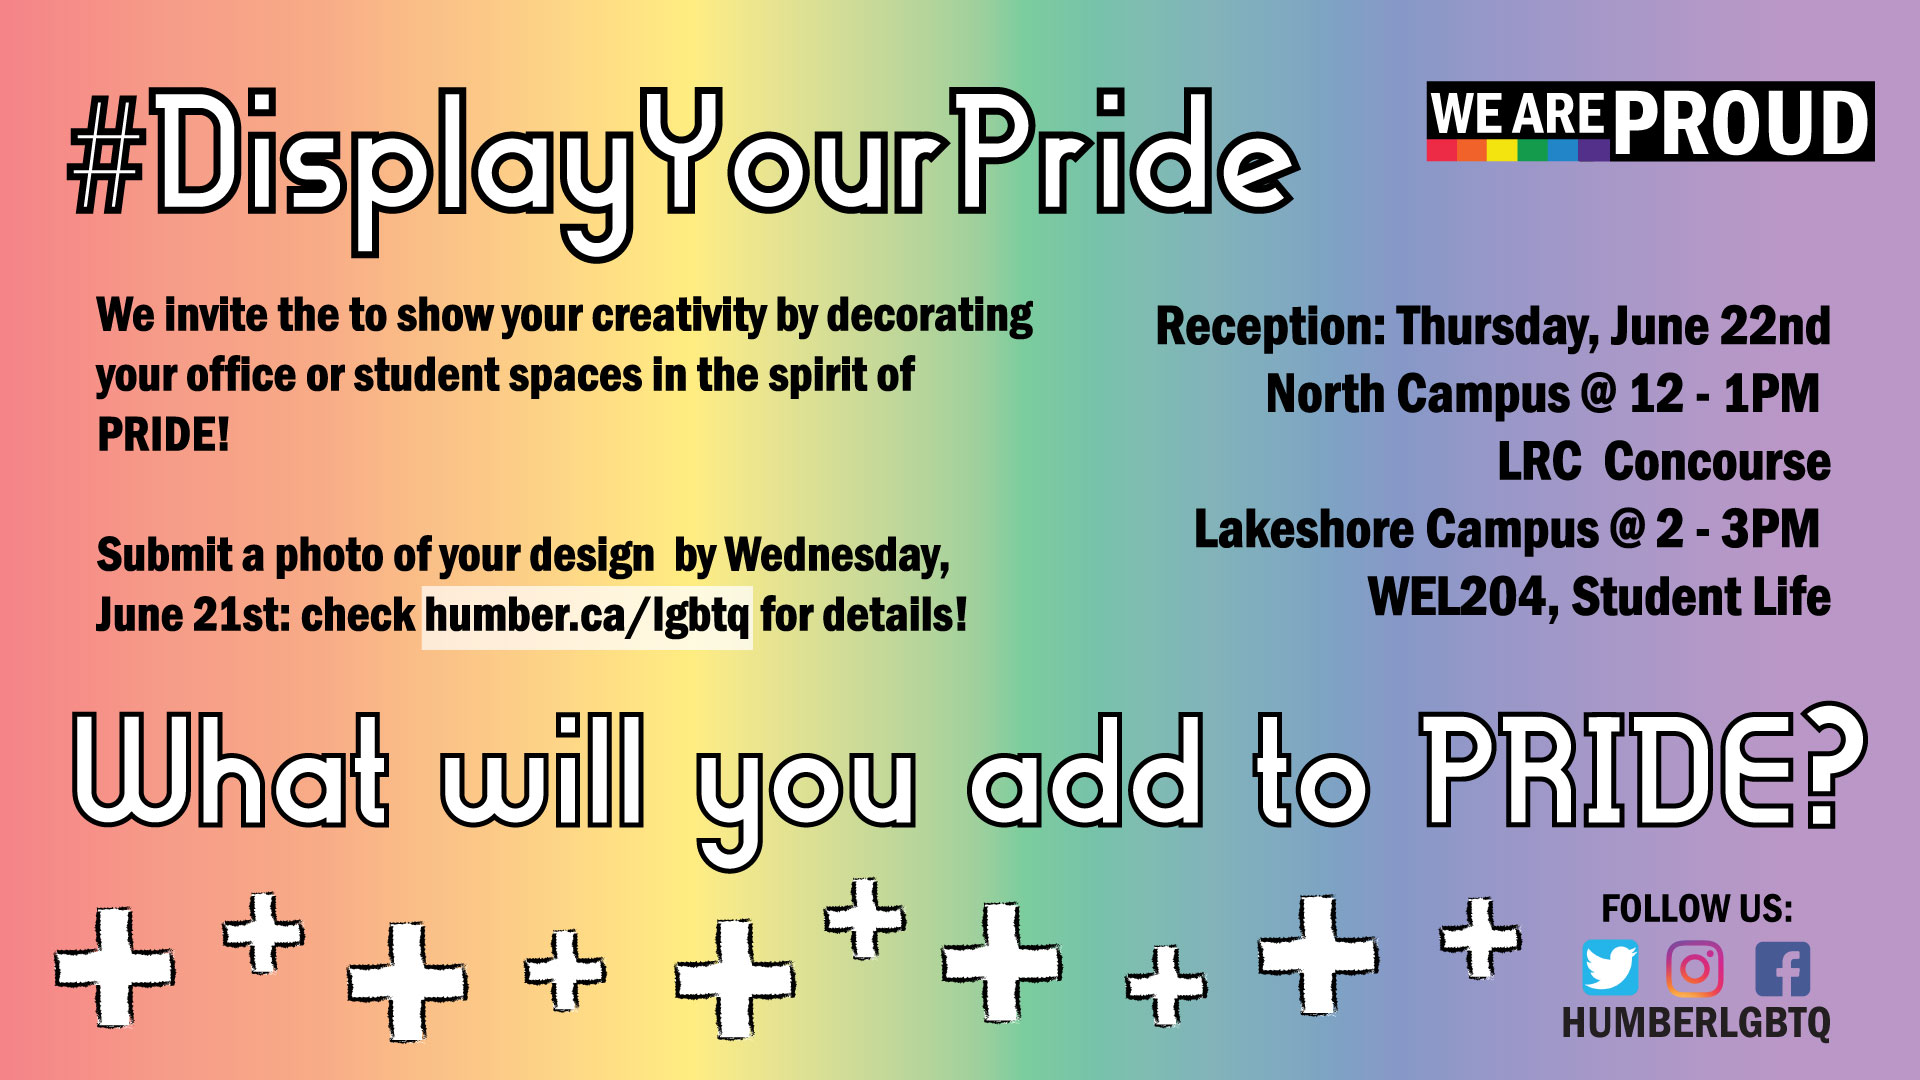 #DisplayYourProide title on rainbow background. We invite you to show your creativity by decorating your office or student spaces in the spirit of PRIDE! Submit a photo of your design by Wednesday June 21st to LGBTQ@humber.ca to enter our optional contest. Display Your Pride Reception locations as in description. What will you add yo Pride? Follow us on social media @humberLGBTQ